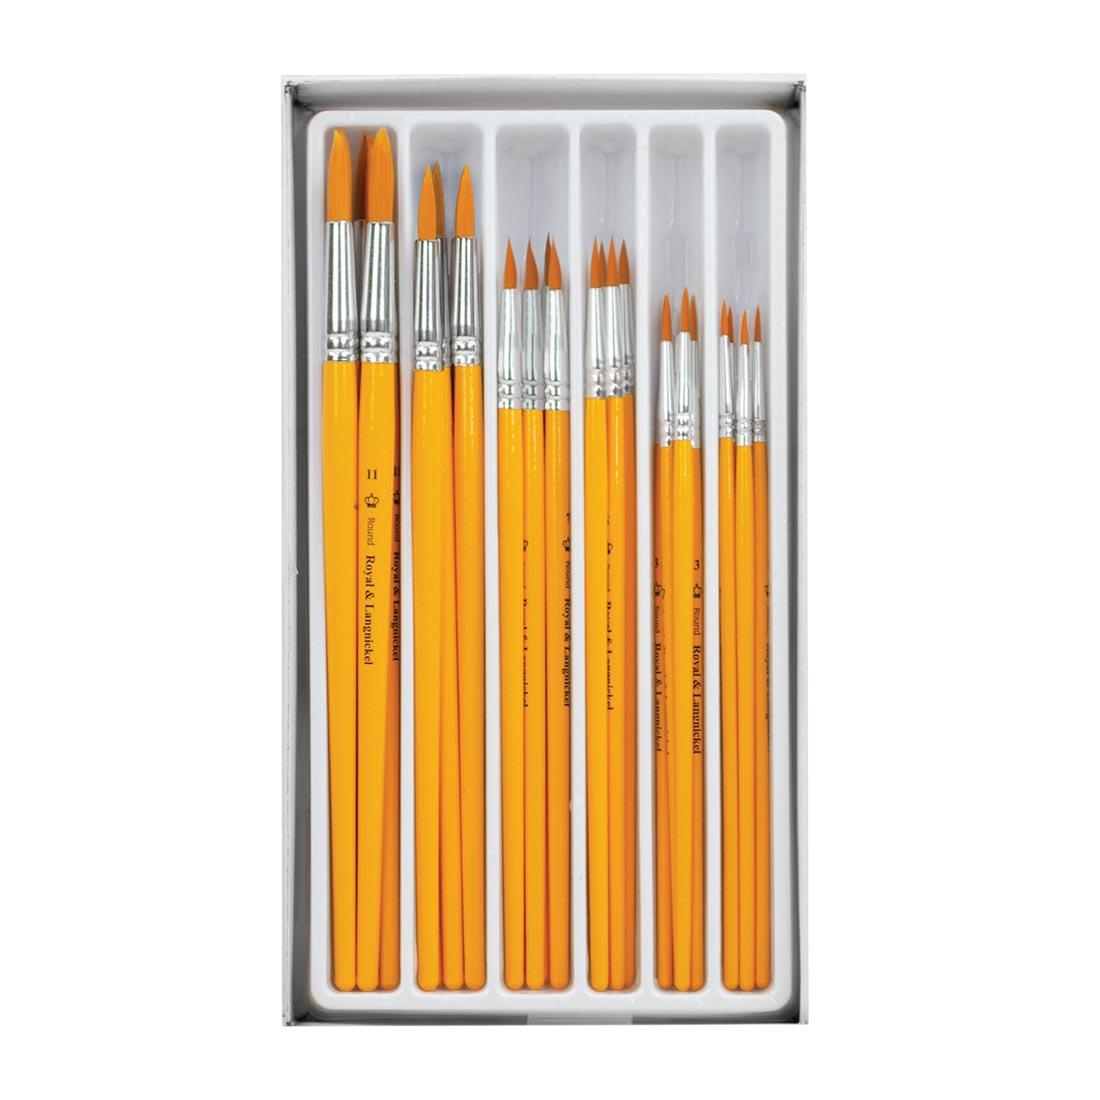 Royal & Langnickel Classroom Value Pack Round Golden Taklon Brush Collection, shown in tray with packaging lid removed